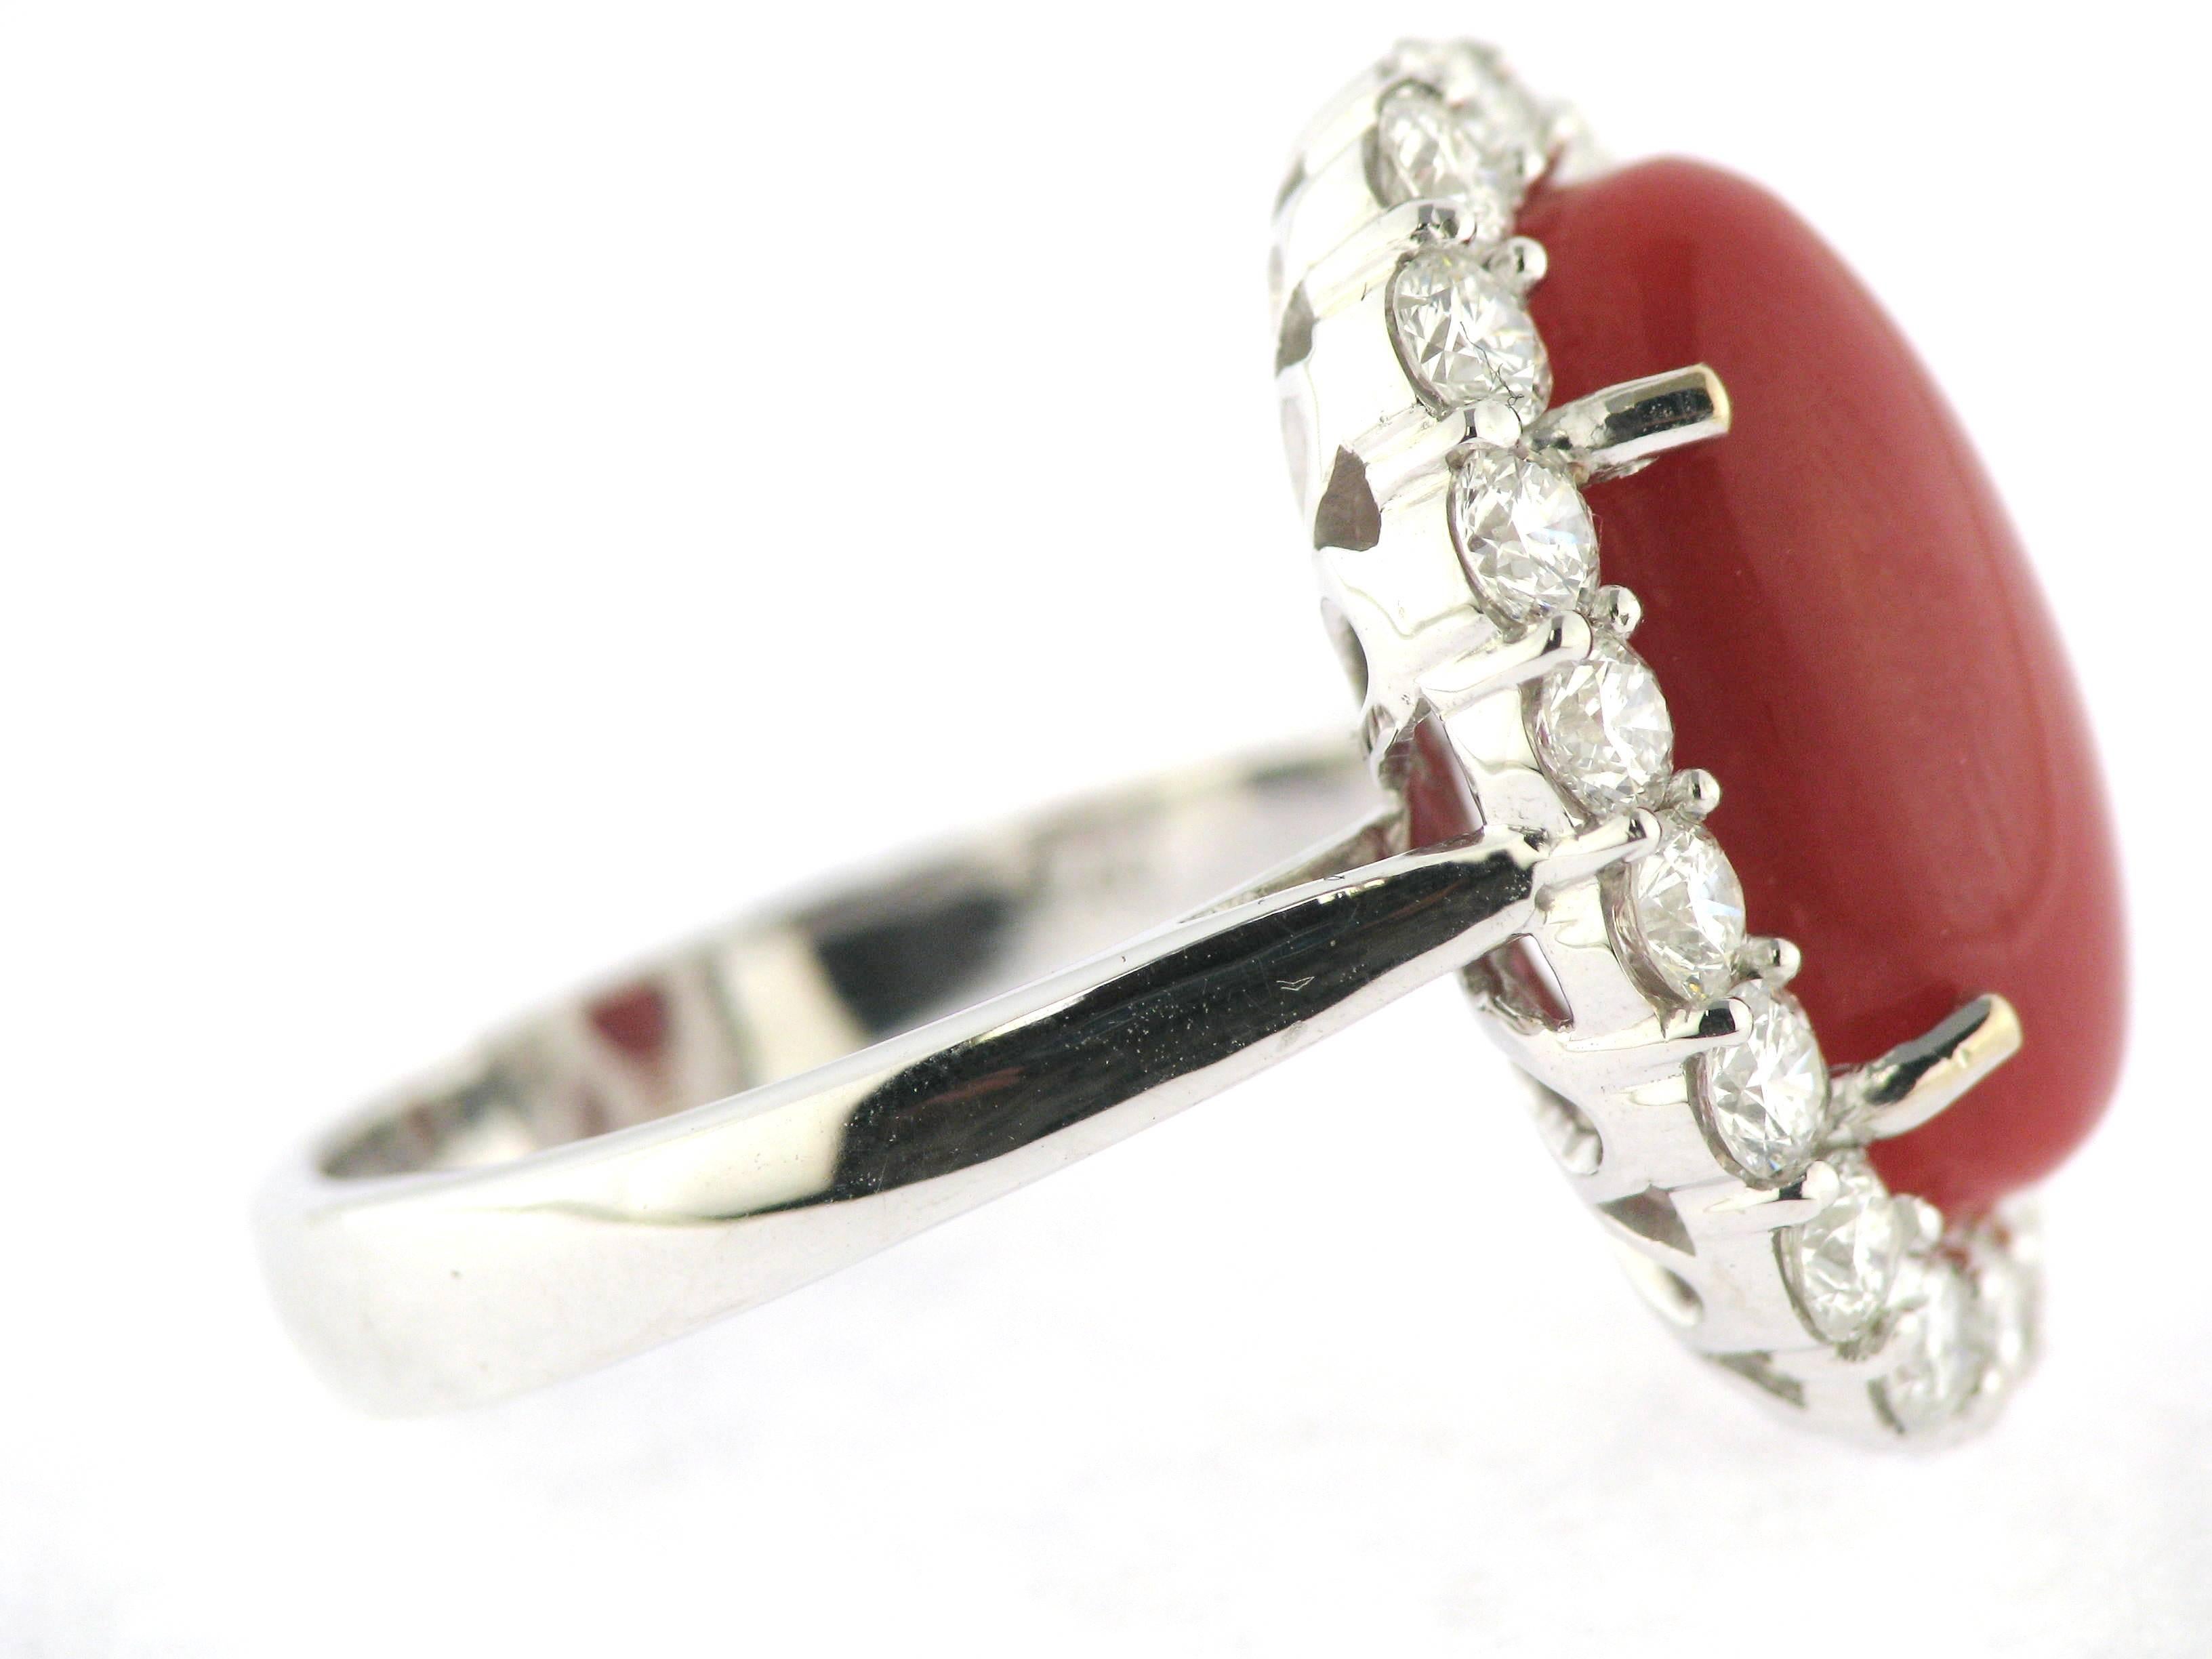 Featuring an 18K white gold cluster ring claw set with a central oval en cabochon cut red (rosso) South China Sea coral 15.3mm x 9.5mm surrounded by 18 Round Brilliant diamond. Total estimated carat weight 1.8  carats. The ring has a rounded shank